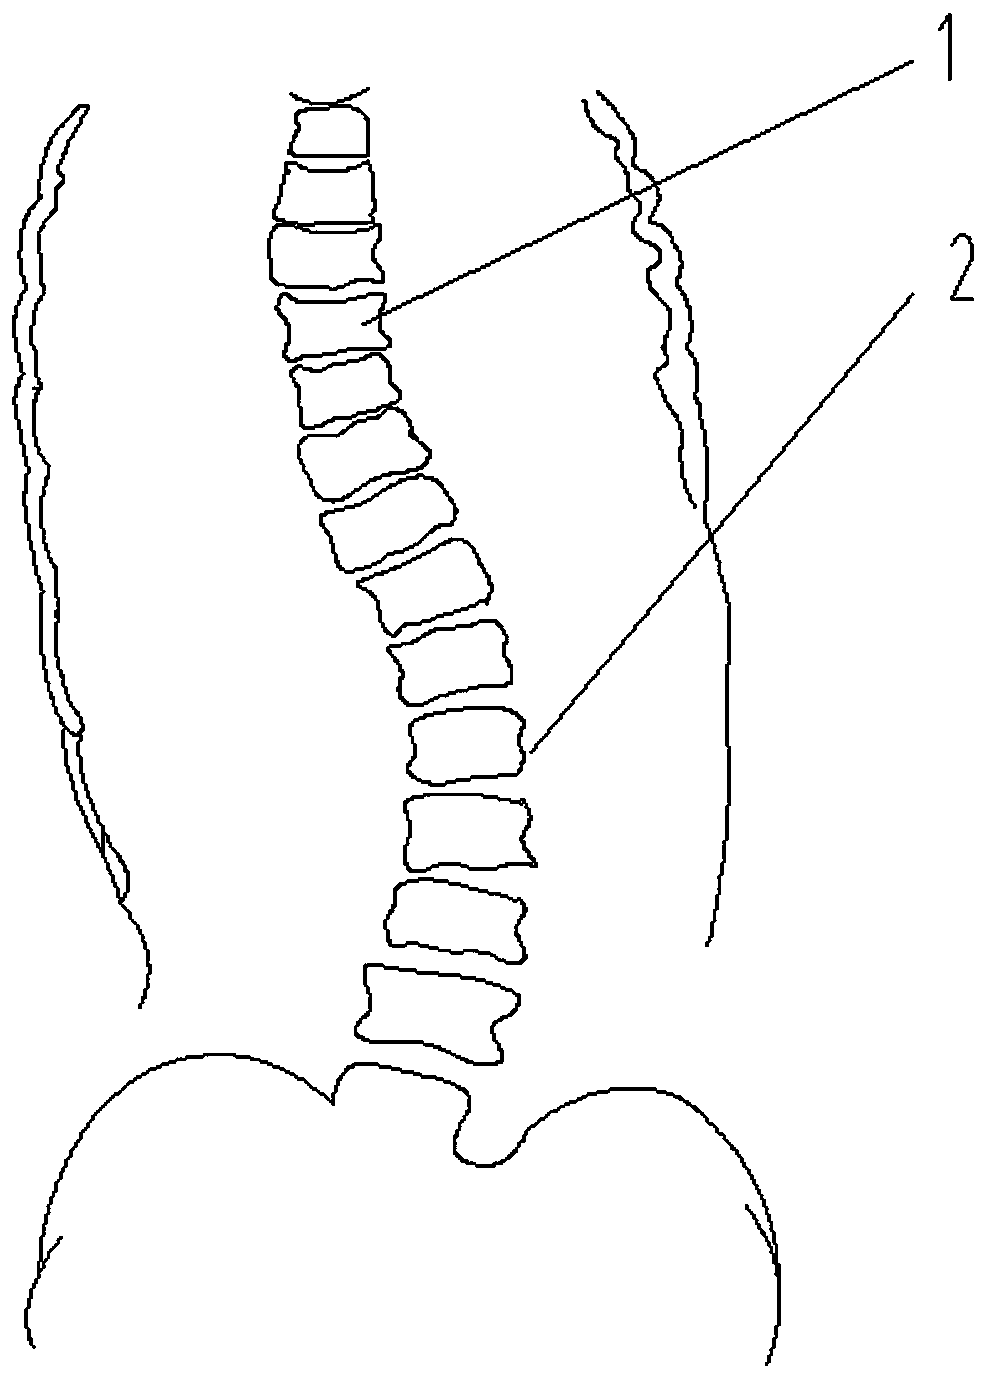 Correcting device for scoliosis